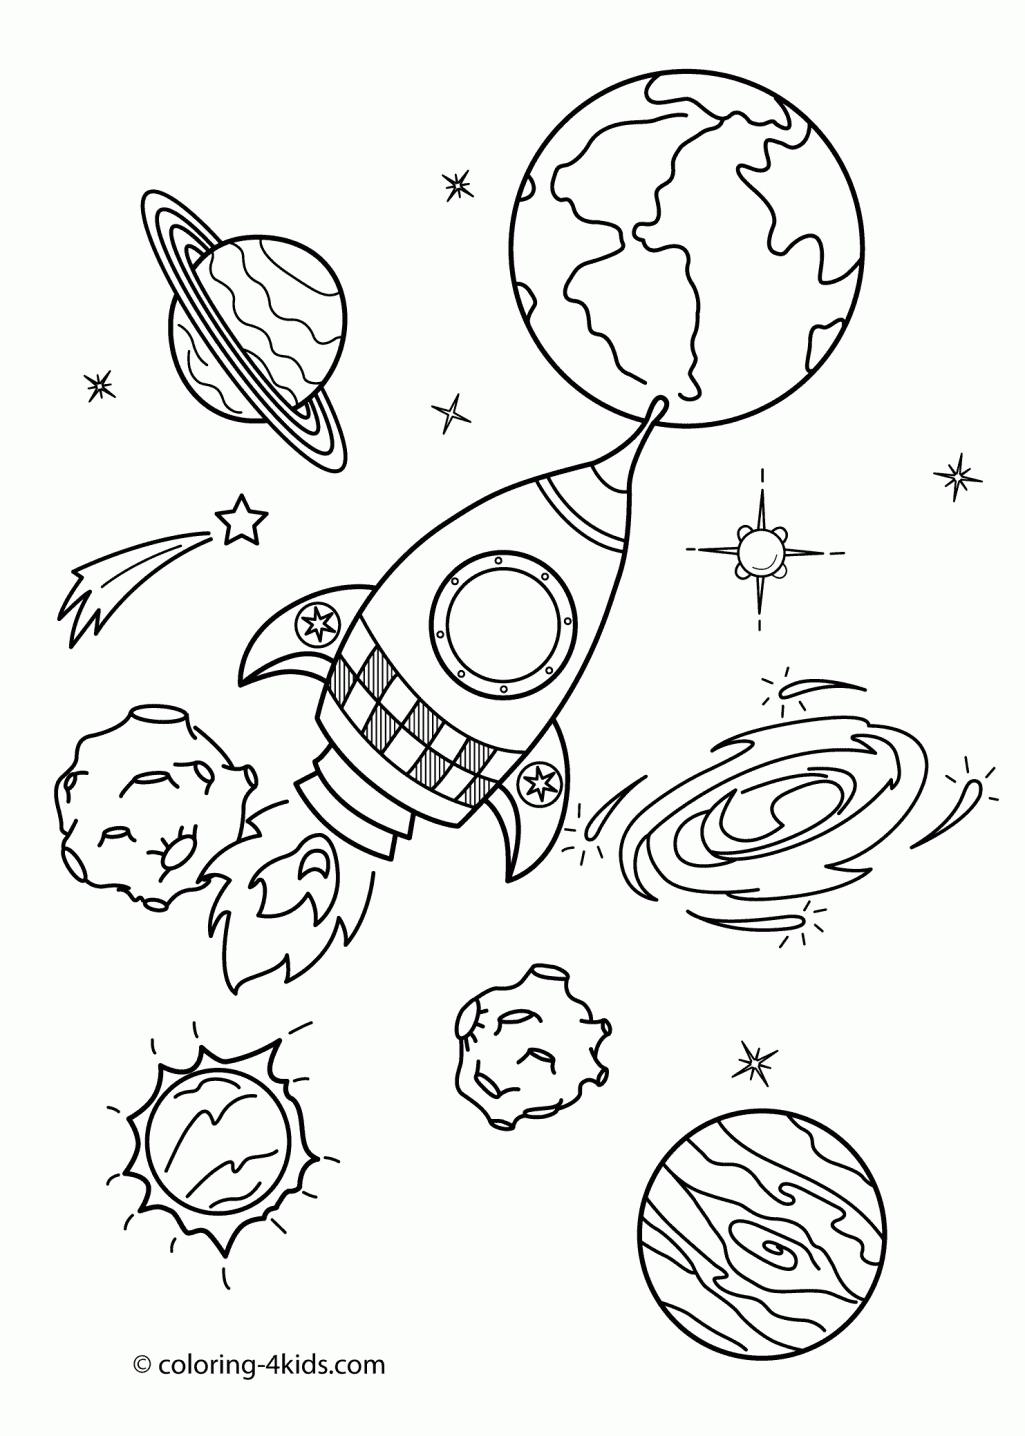 free-astronaut-outer-space-coloring-page-download-free-astronaut-outer